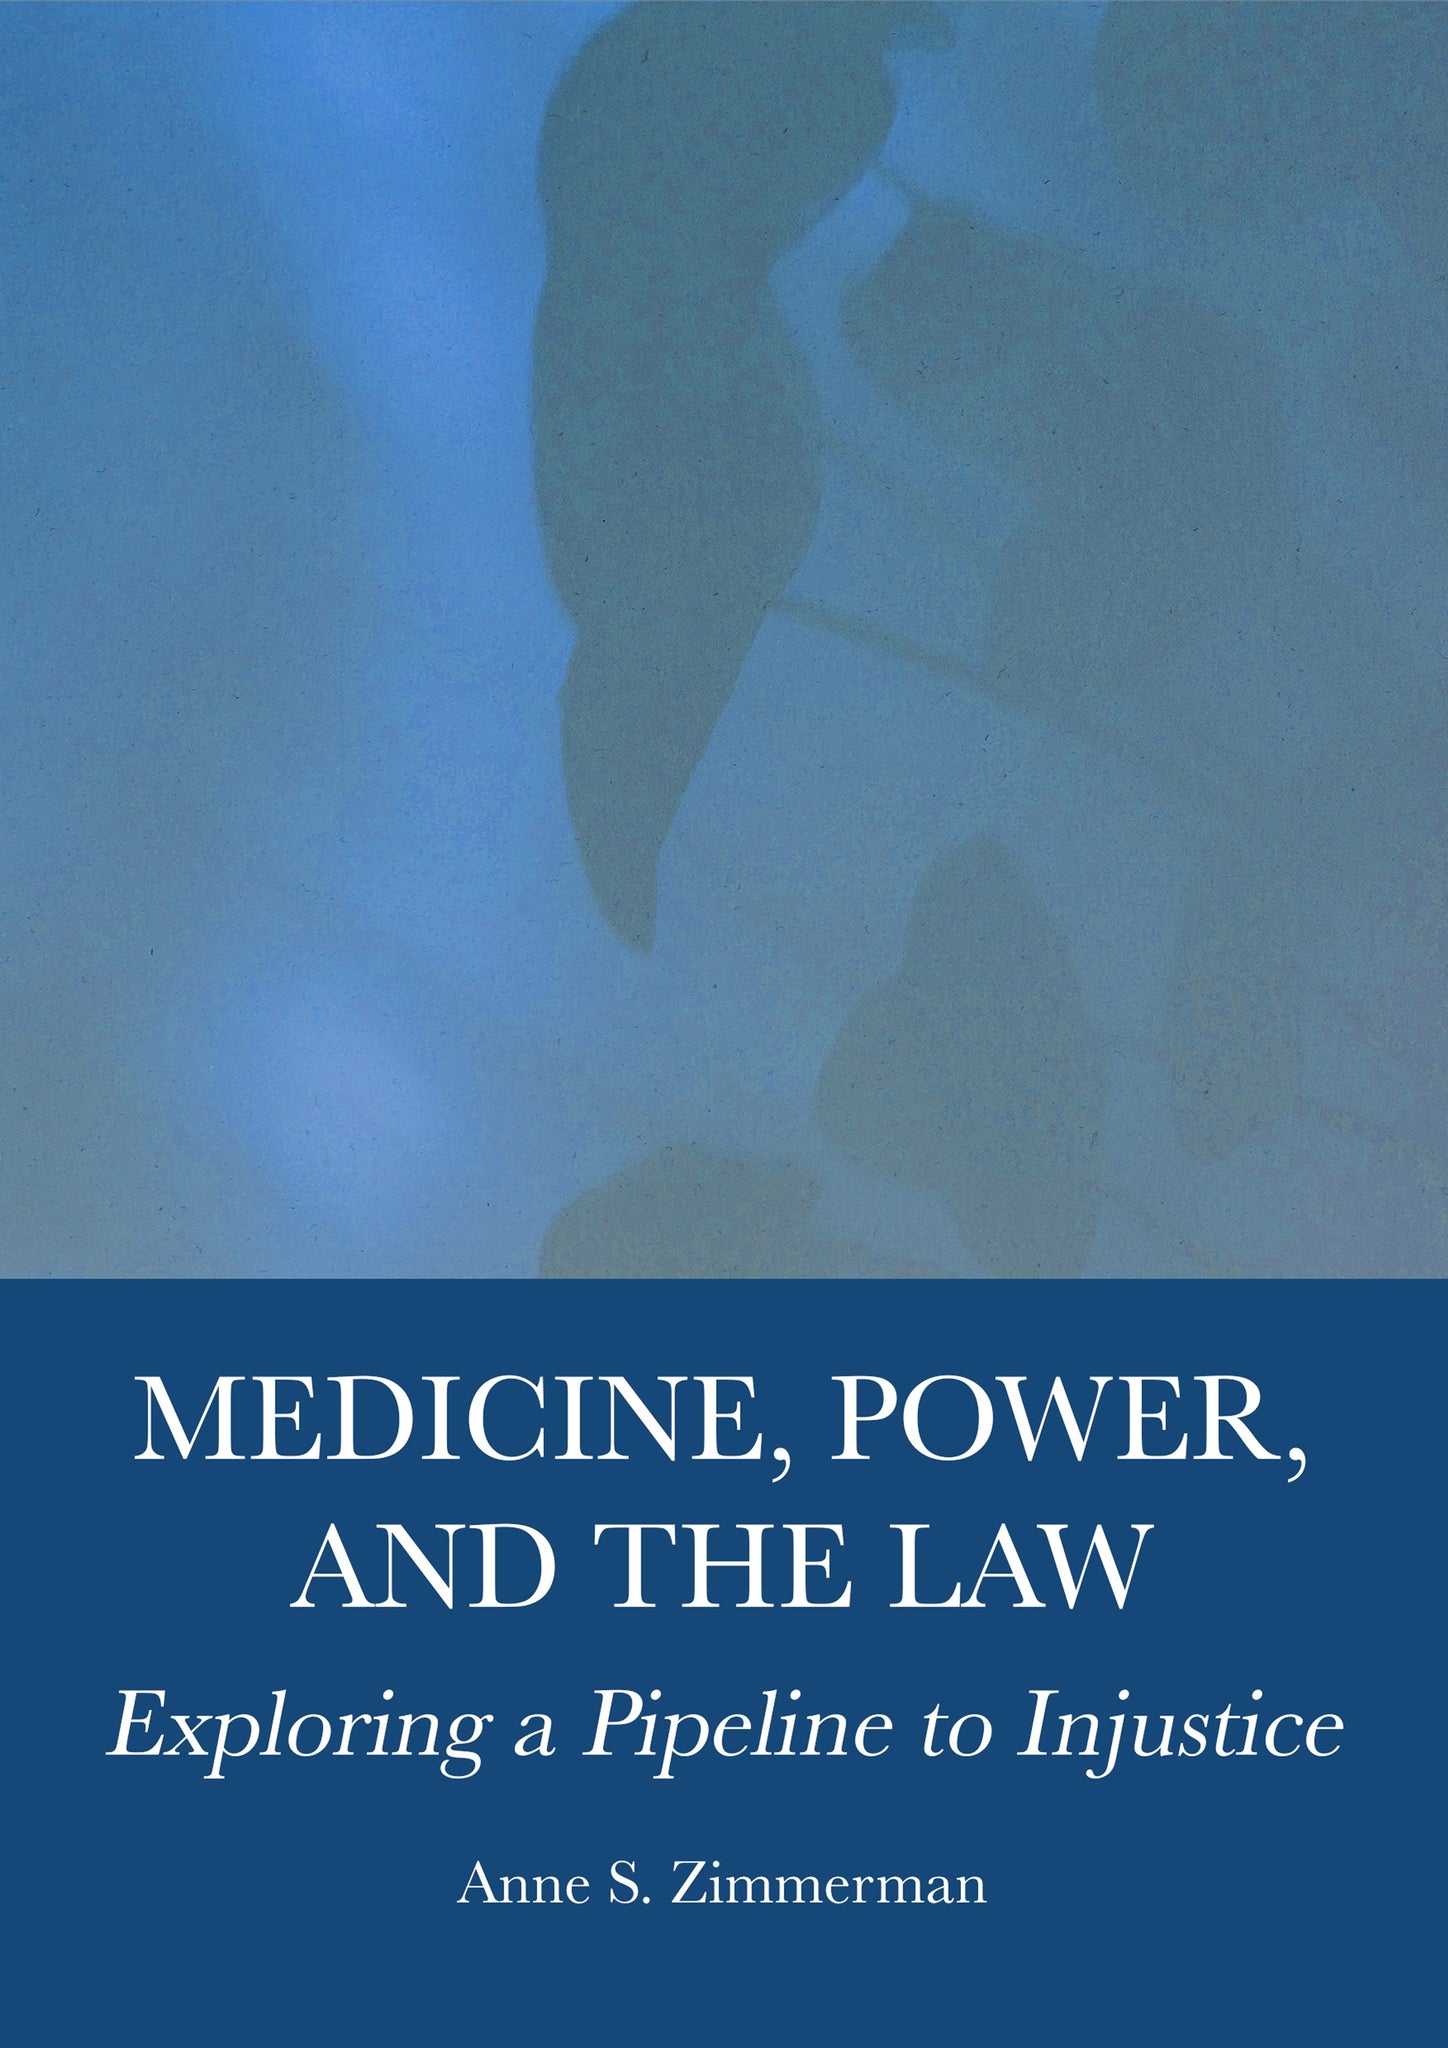 Medicine, Power, and the Law: Exploring a Pipeline to Injustice